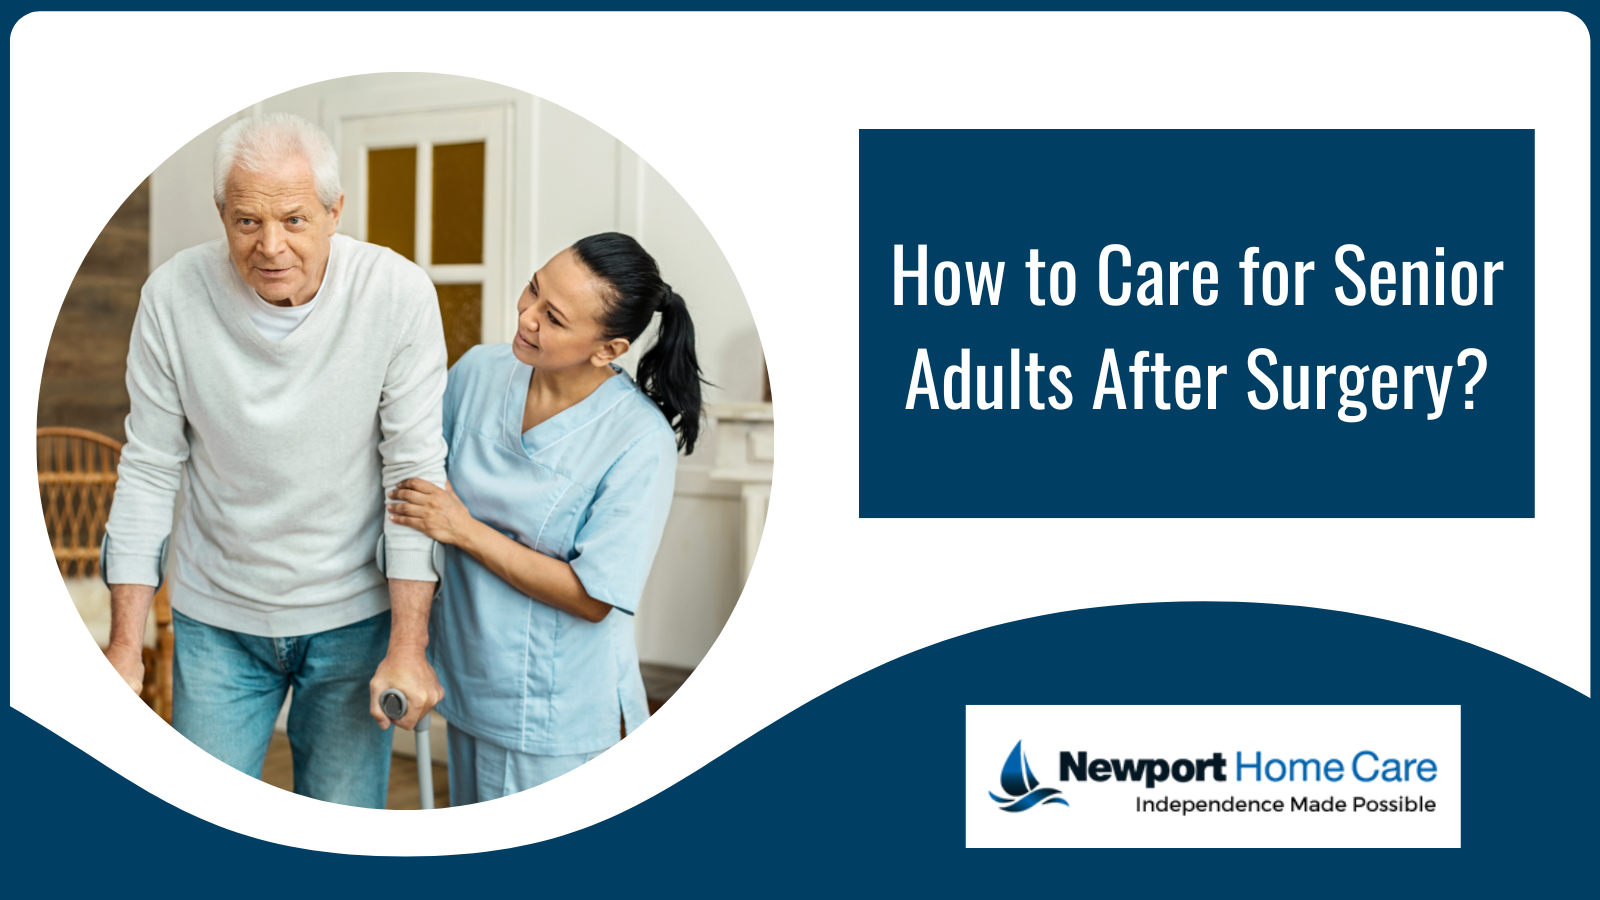 How to Care for Senior Adults After Surgery